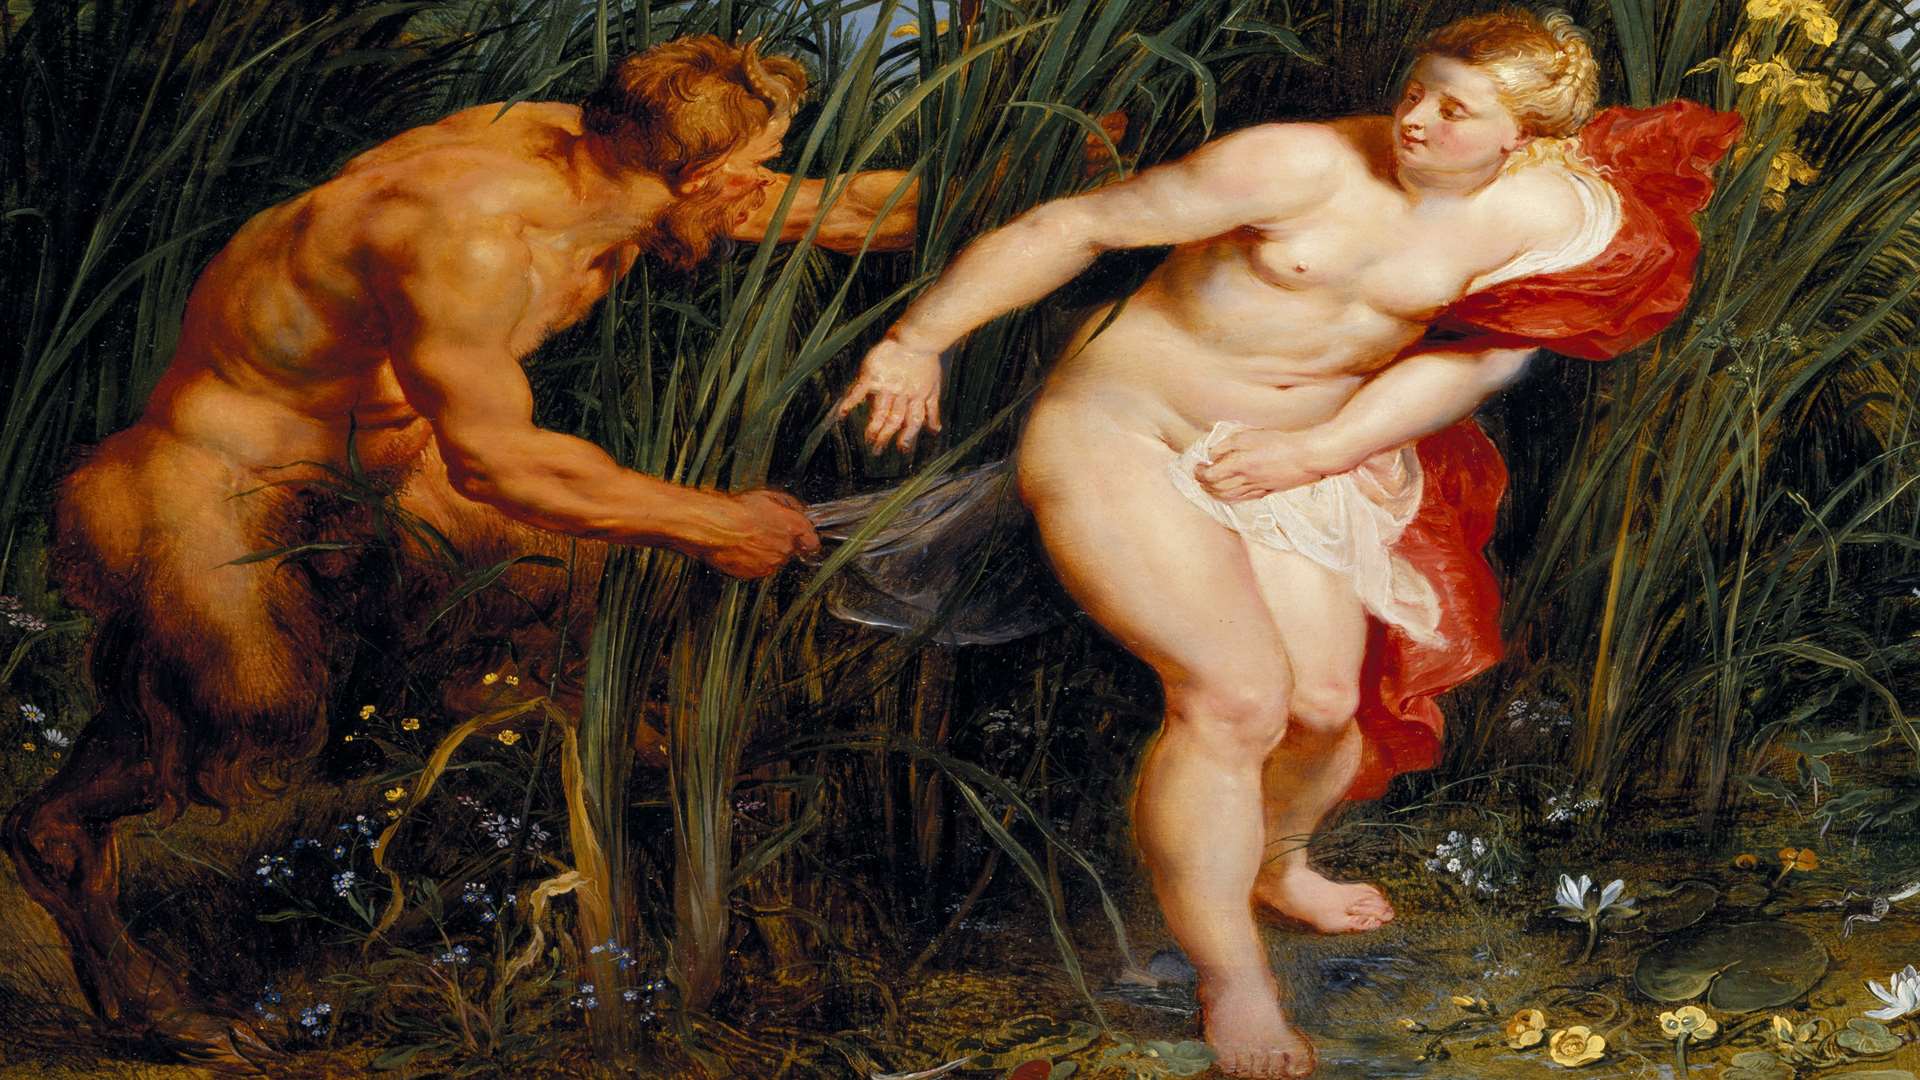 Pan and Syrinx by Rubens - painted in 1617